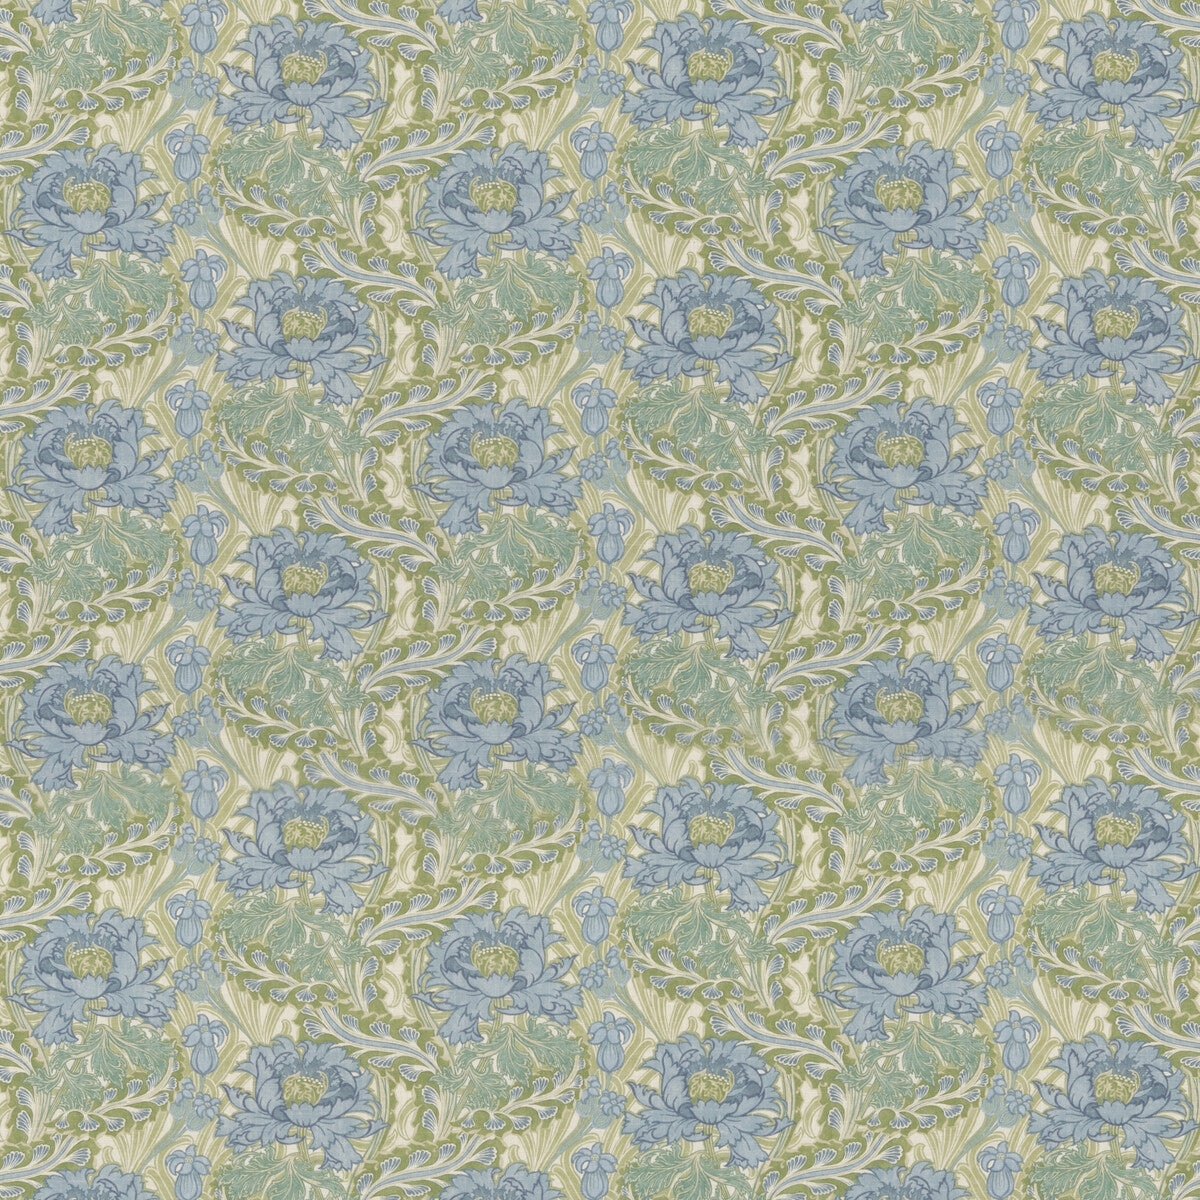 Little Brantwood fabric in blue/green color - pattern BP10983.1.0 - by G P &amp; J Baker in the Original Brantwood Fabric collection